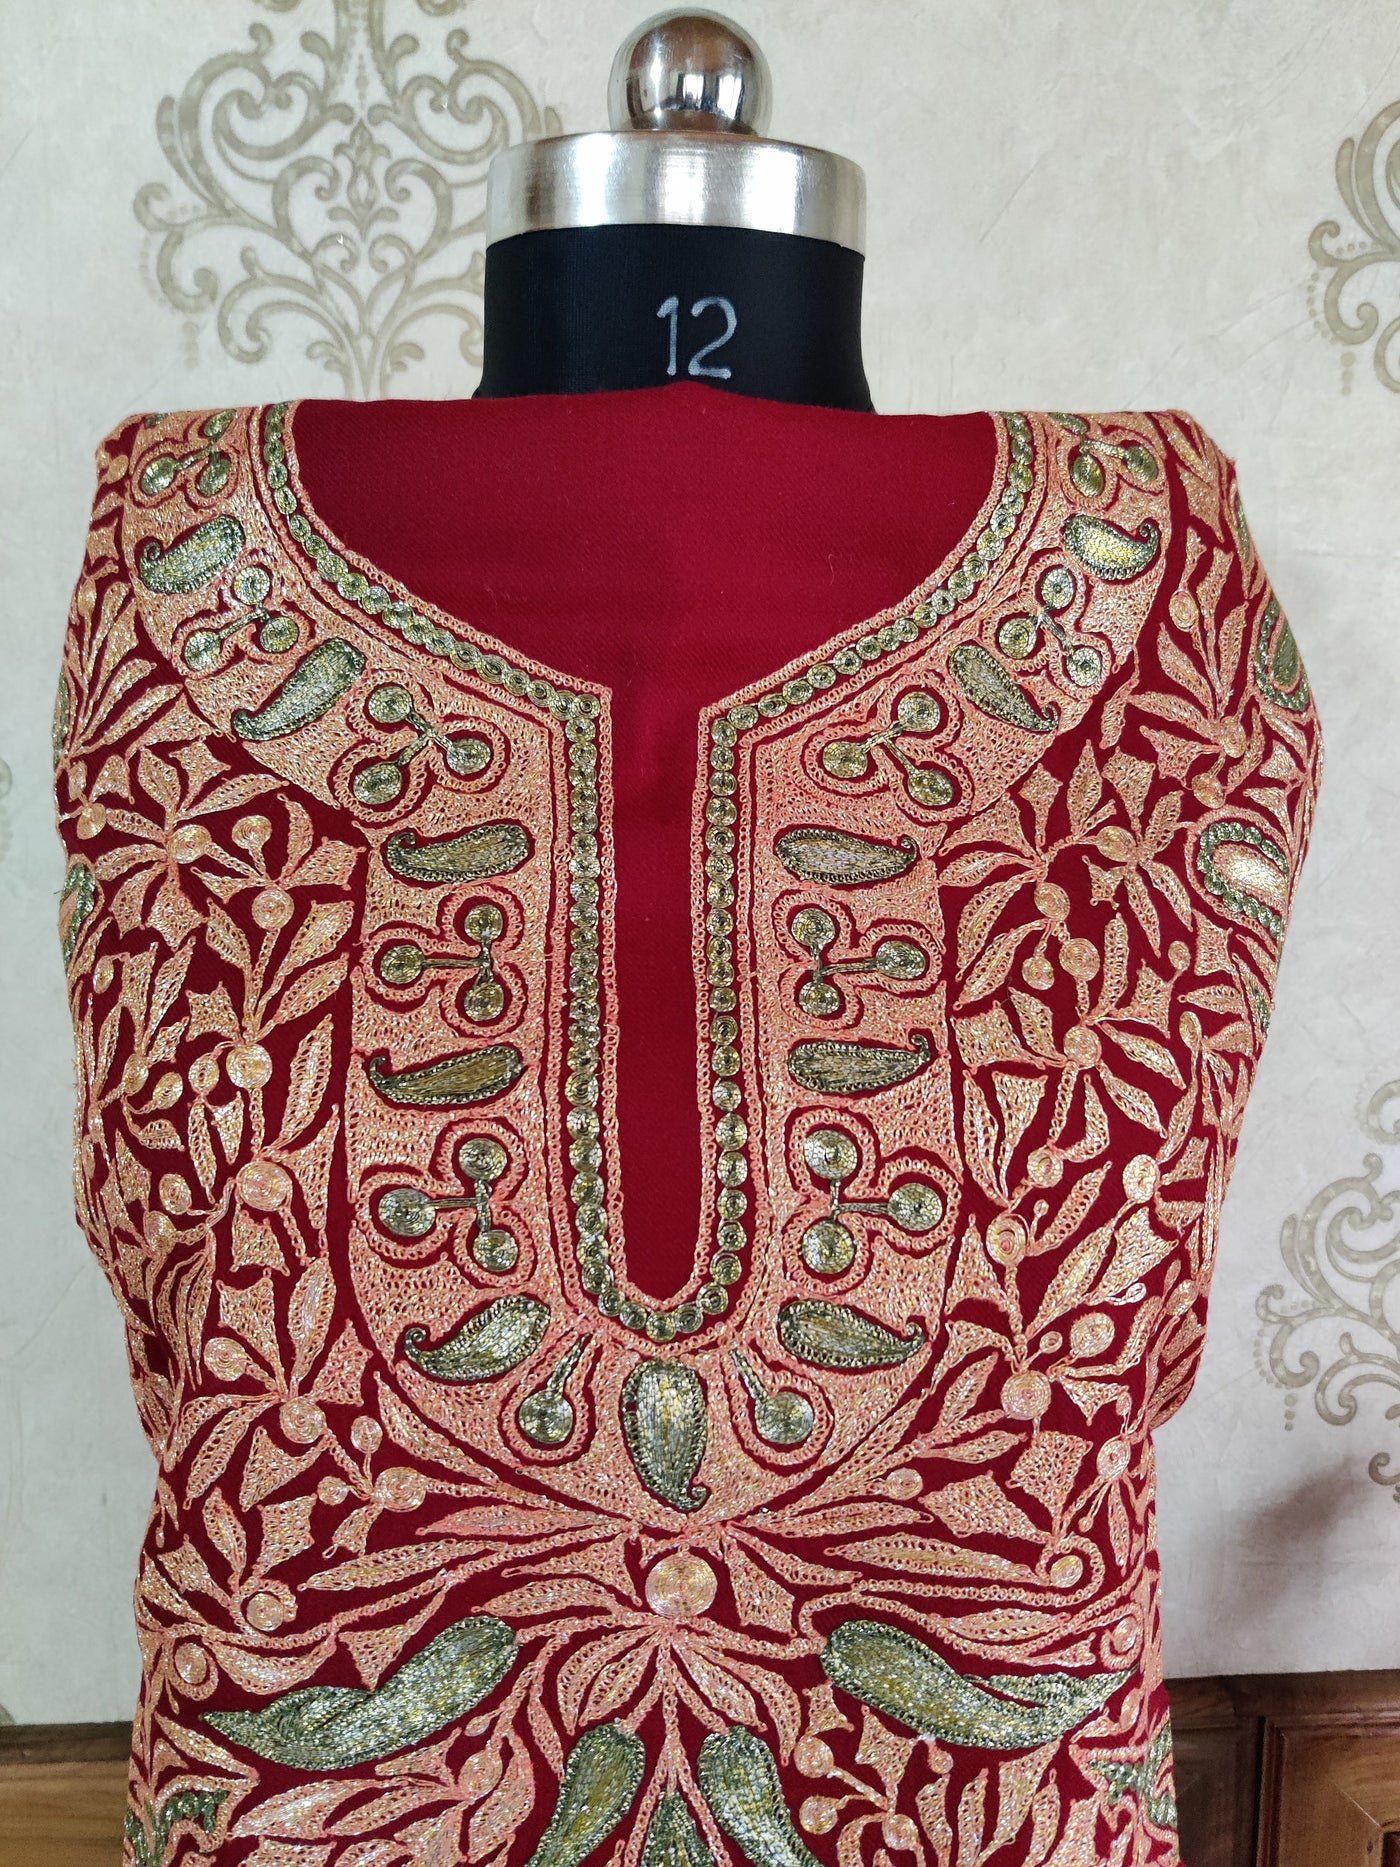 Maroon Kashmiri Woolen Suit with Multi Dual Color Tilla Embroidery All Over Paisley Designs (3 Pcs) Woolen Suit KashmKari Blue Kashmiri Woollen Suit With Tilla Embroidery jaal design (3 pcs).  Kashmiri Suit online